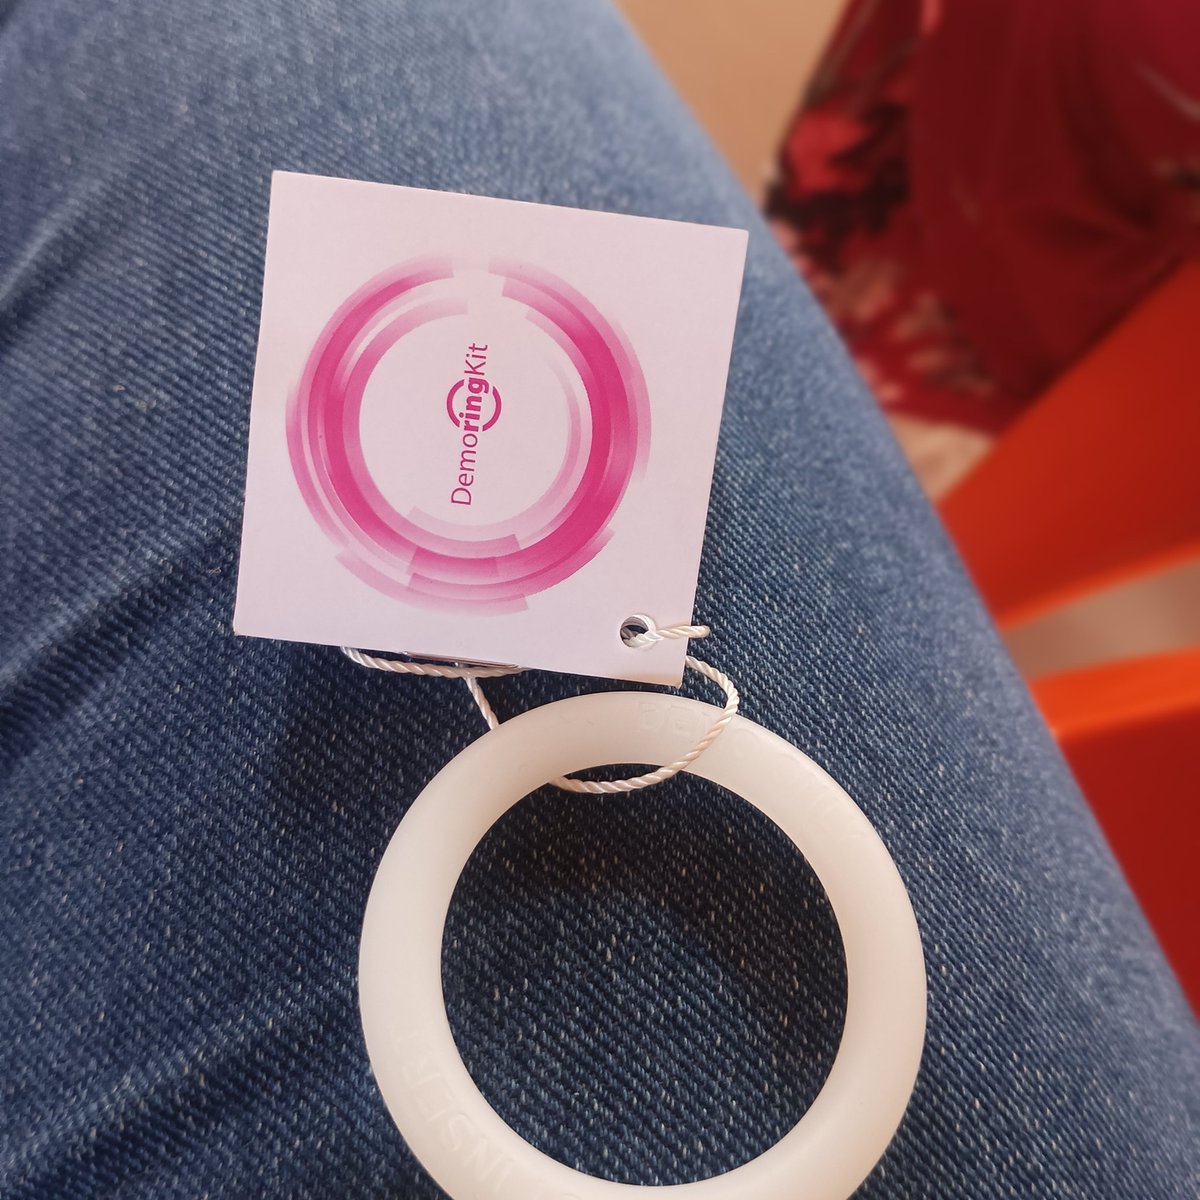 SMALL BUT MIGHTY! 💪🏾: The dapivirine vaginal ring packs a powerful punch in the fight against HIV 📣 Every woman deserves access to tools that put her in control of her HIV prevention journey💁🏾‍♀️. #DVR offers just that! #HIVPrevention #EmpoweRing #preventionbychoice